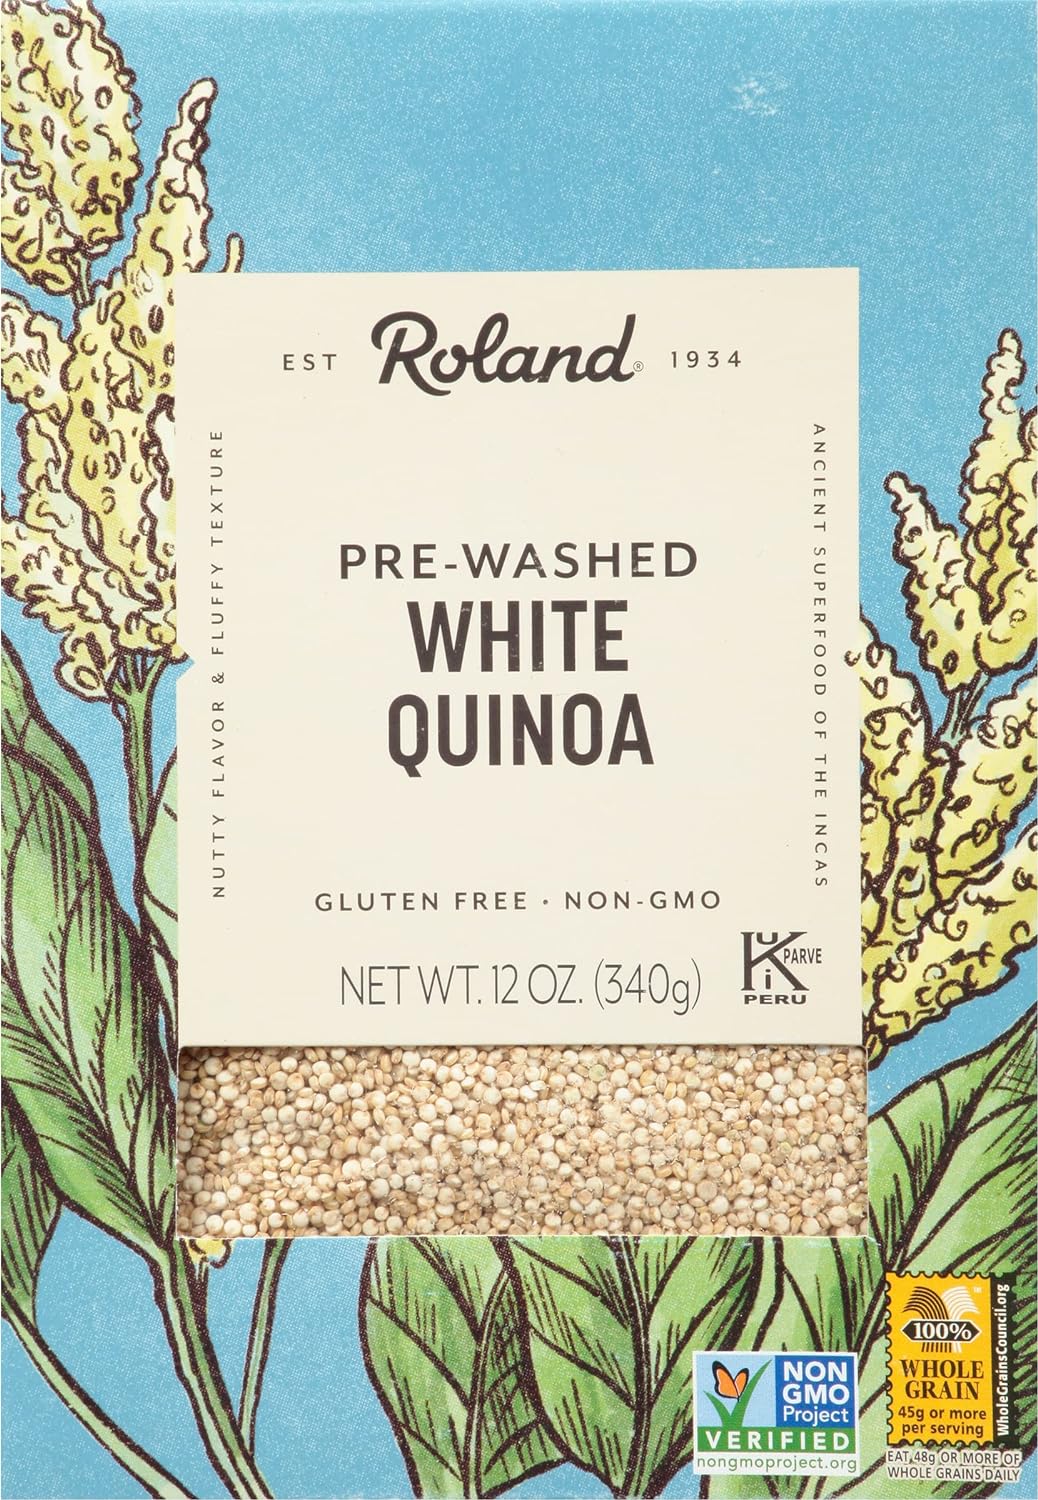 Roland Foods White Quinoa, Pre-washed, Specialty Imported Food, 12-Ounce